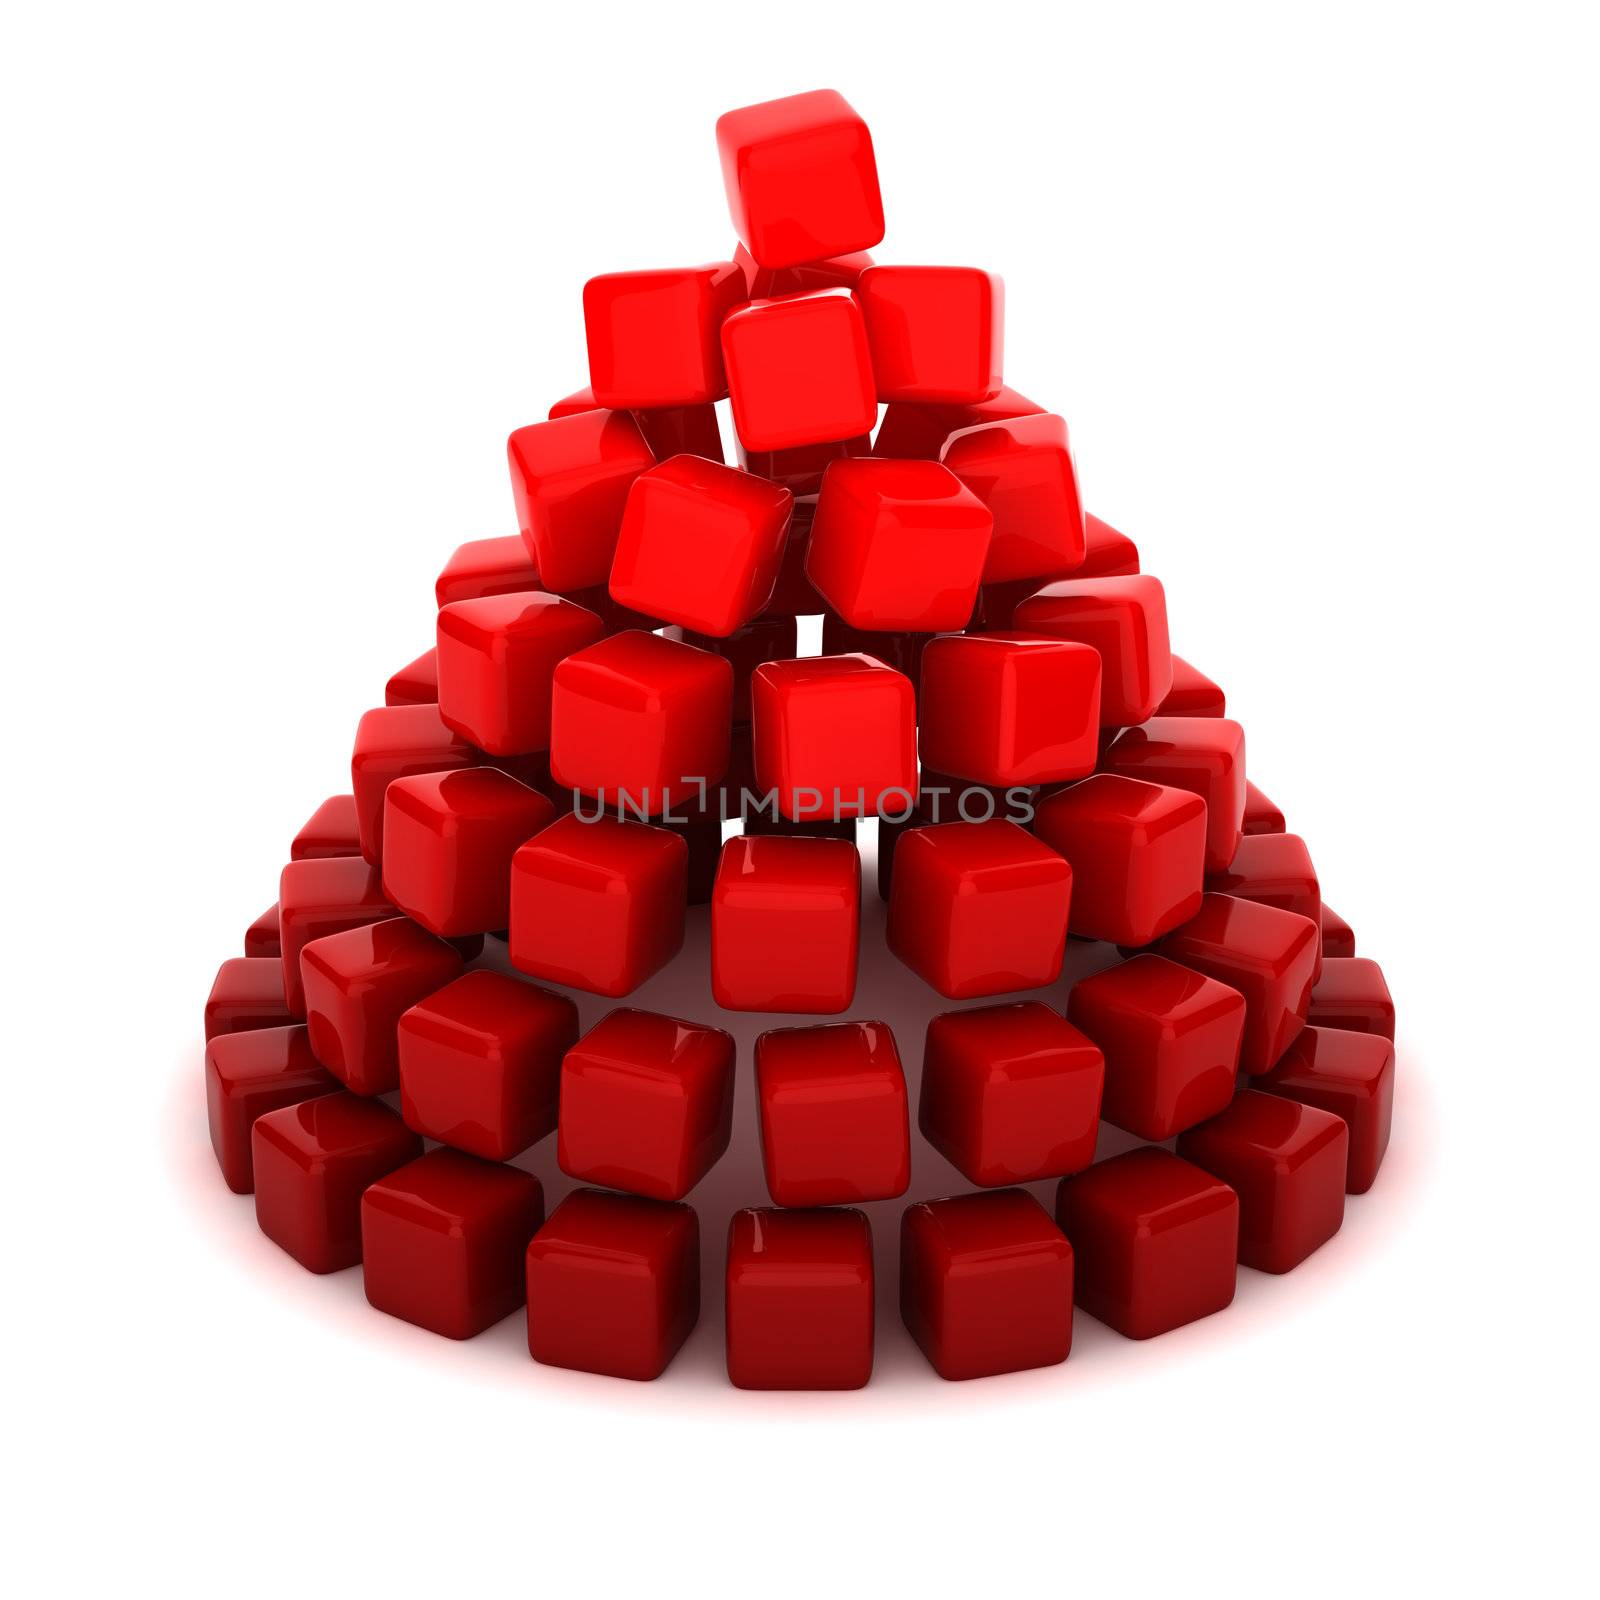 Cone shaped by red cubes